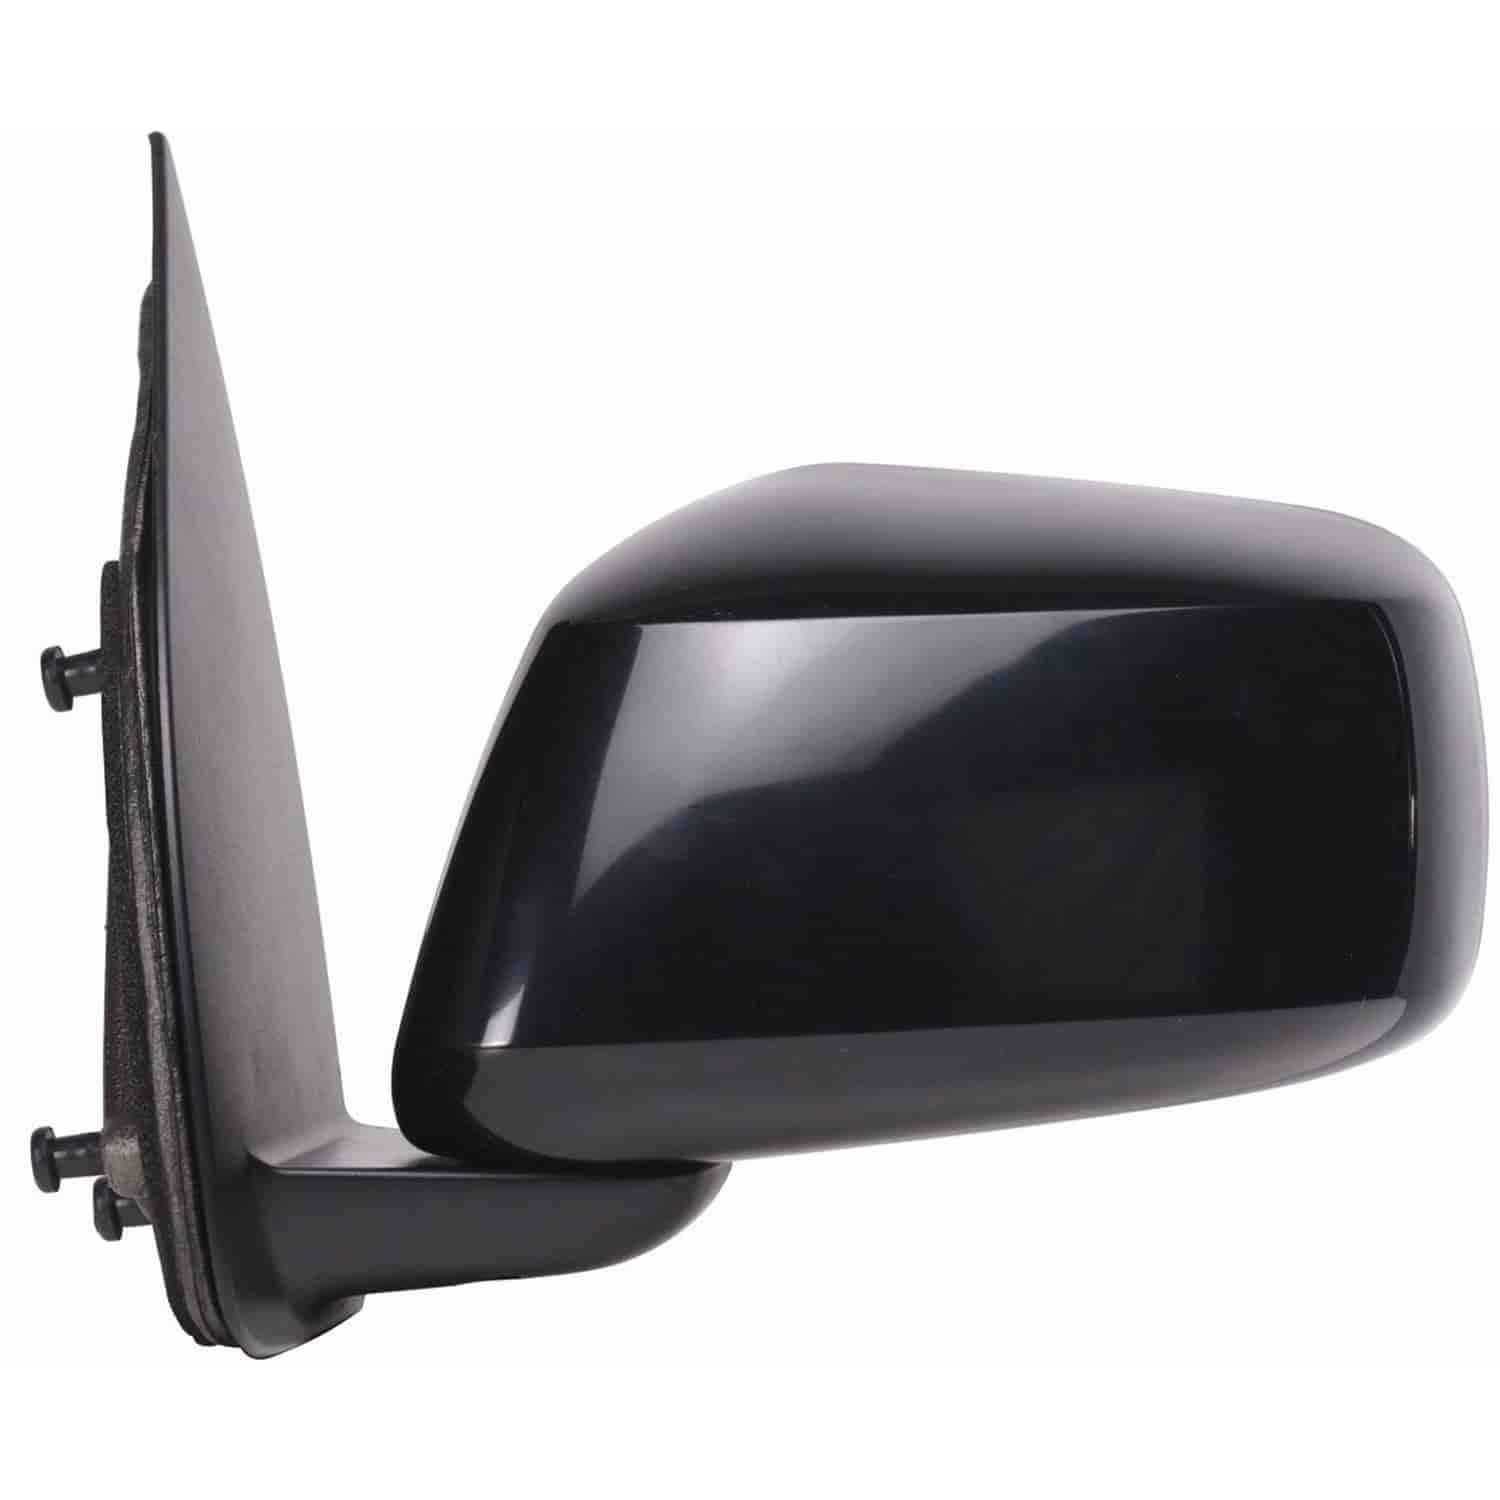 OEM Style Replacement mirror for 05-14 Nissan Frontier